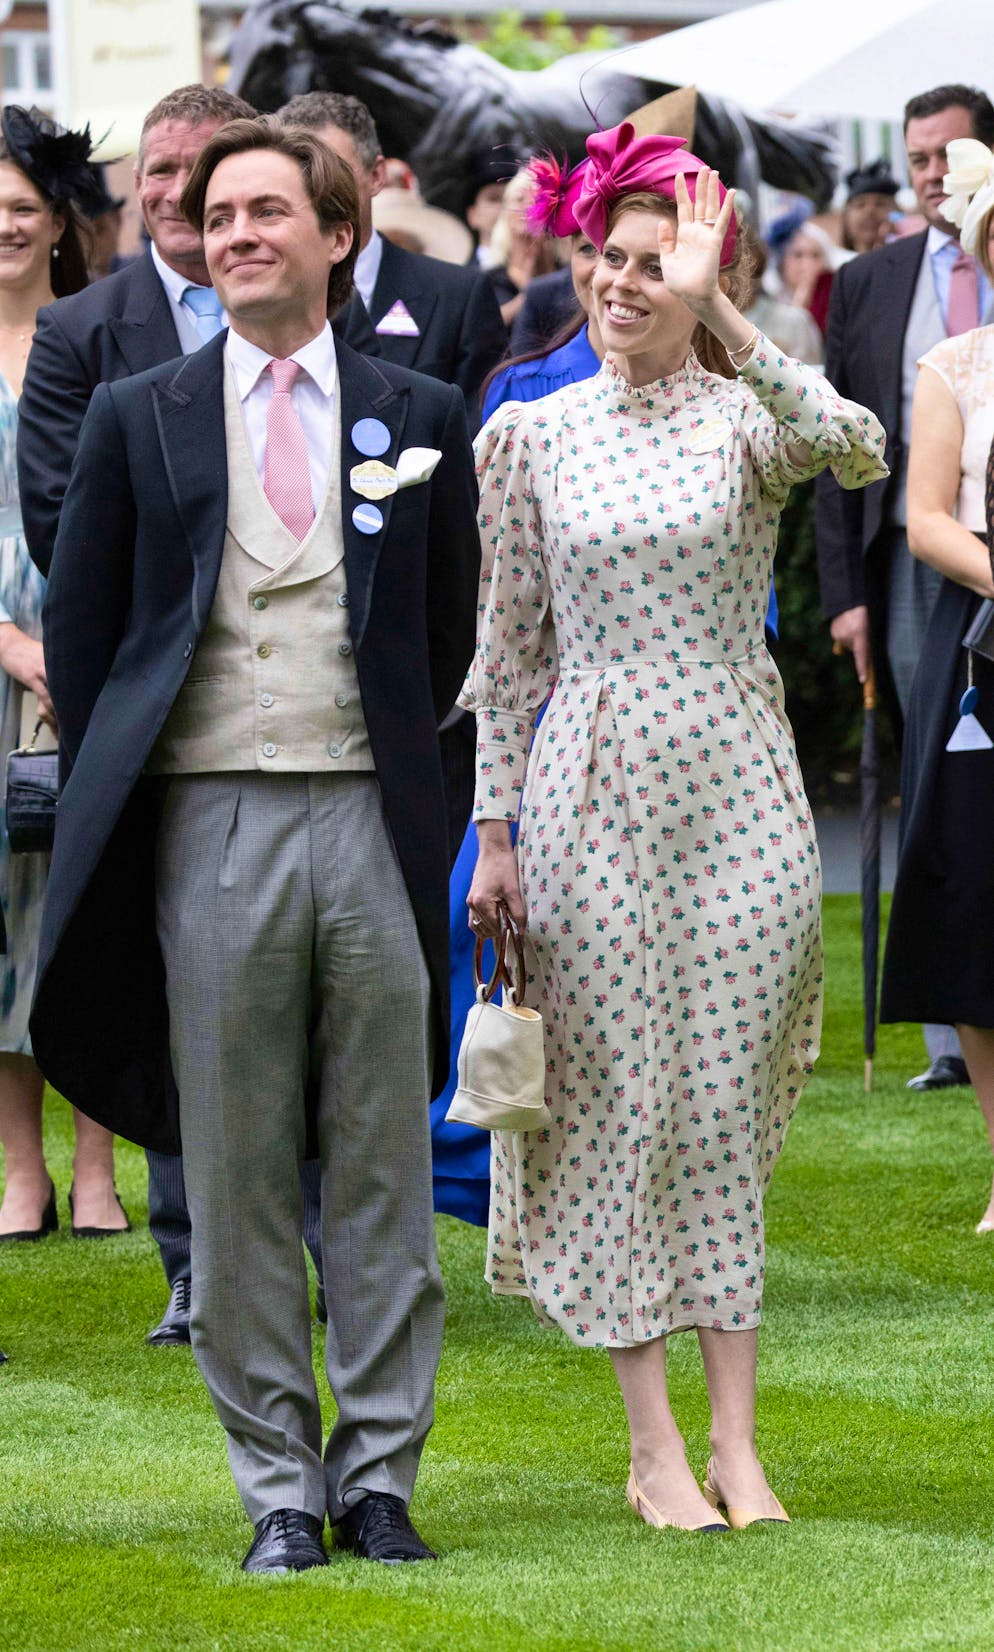 The most beautiful views from Royal Ascot.  Princess Beatrice showered roses at Royal Ascot: Her beige dress by Beola London is covered in tiny pink prints.  The husband, Eduardo Mapelli Mozzi, appears with a hat on his head, as required.